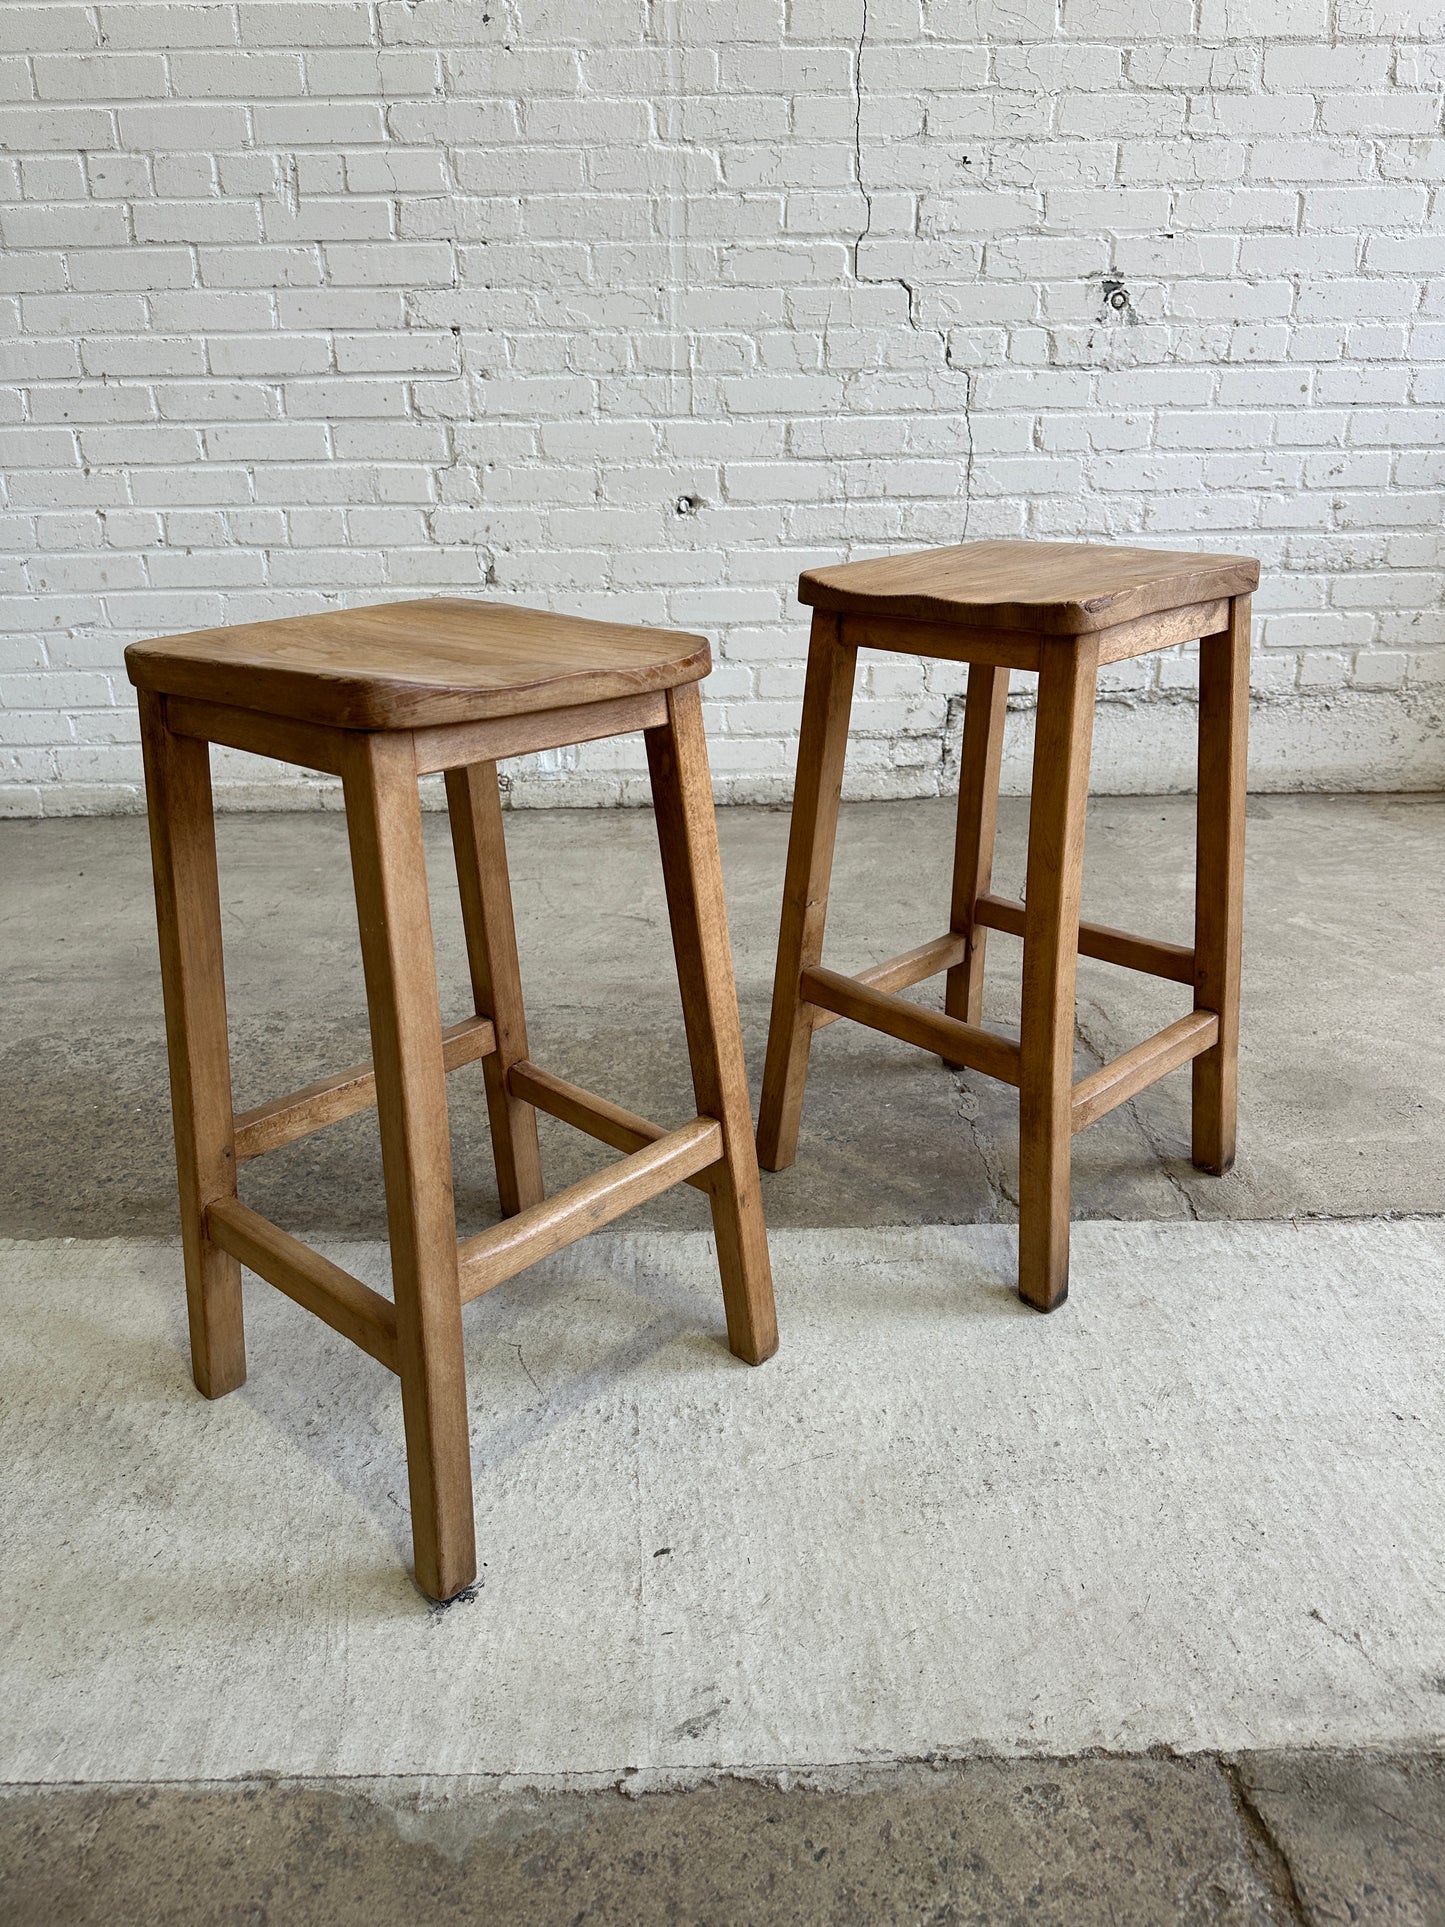 Antique English Pair of Stools with Saddle Seats, c. 1920